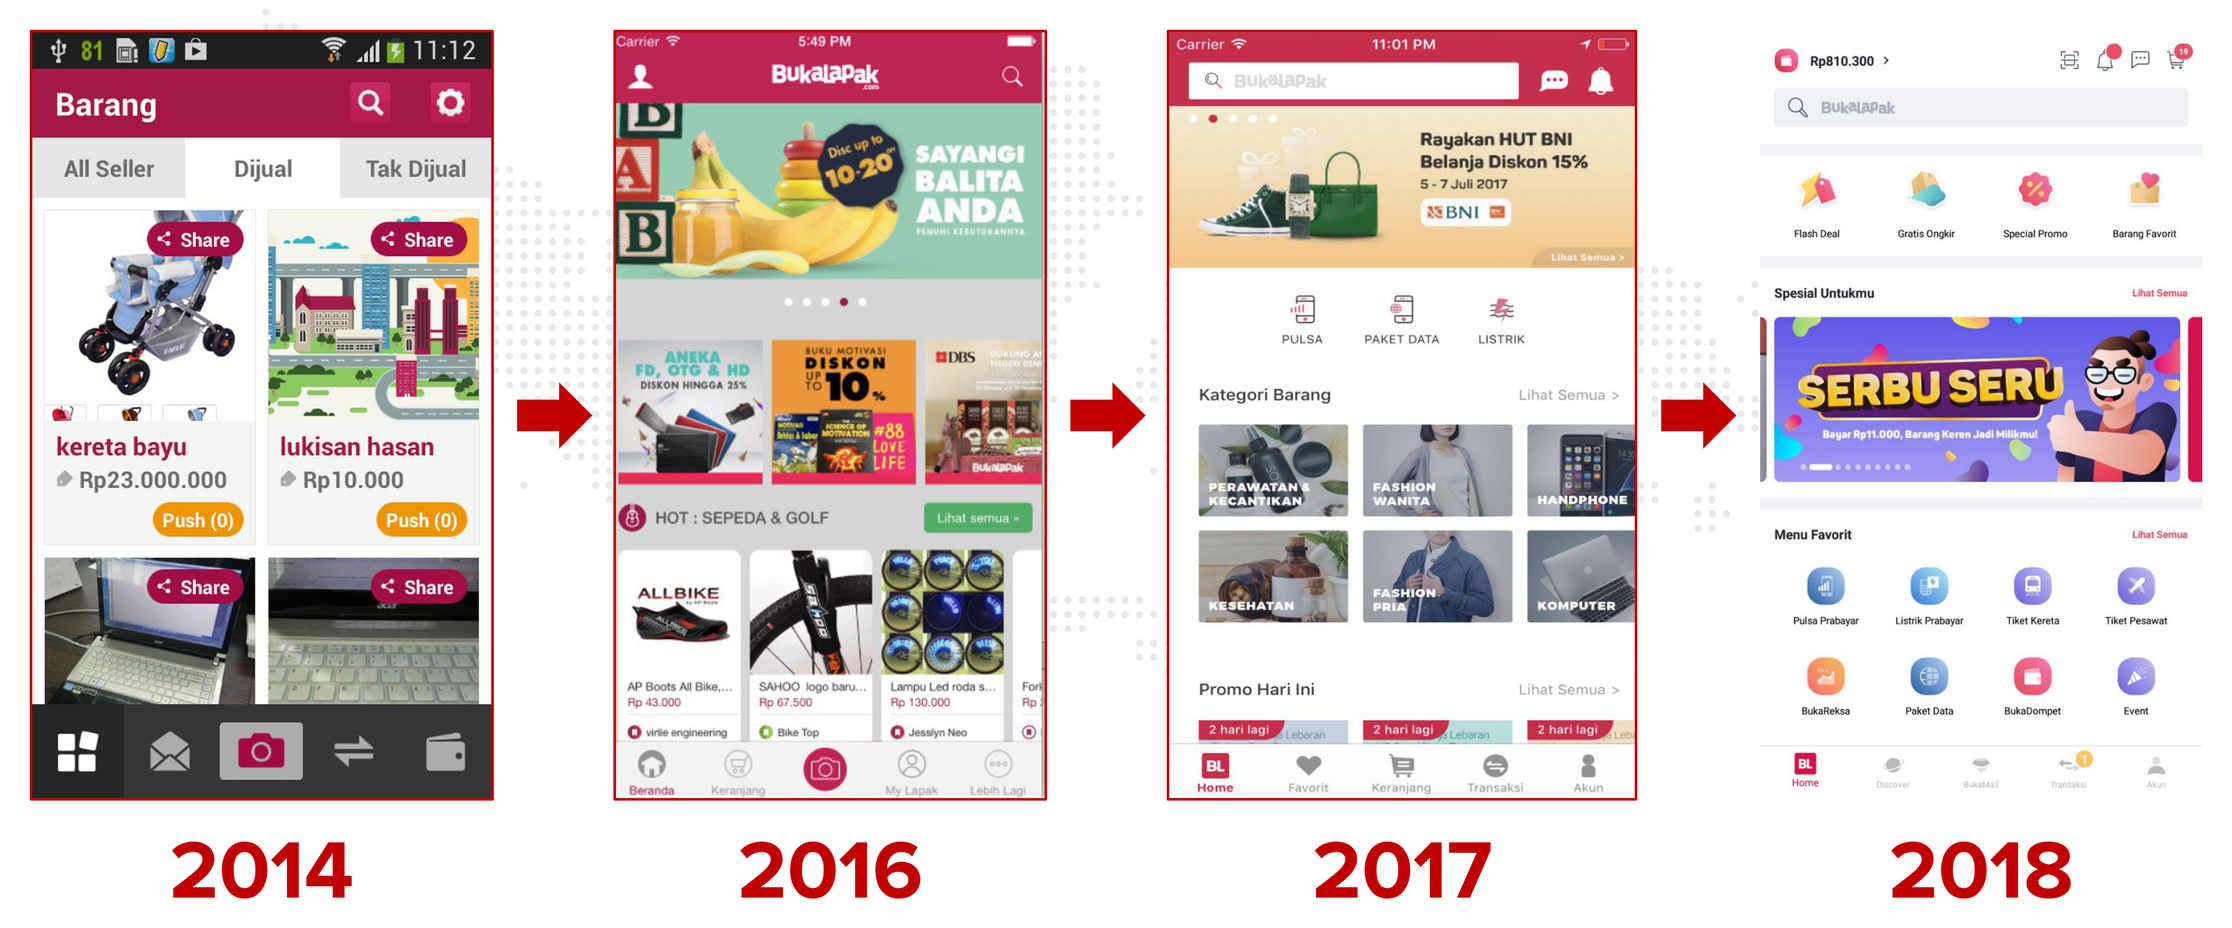 From 100 to 1100 Tech Talents: How Bukalapak Became the Largest Product Development Company in Indonesia